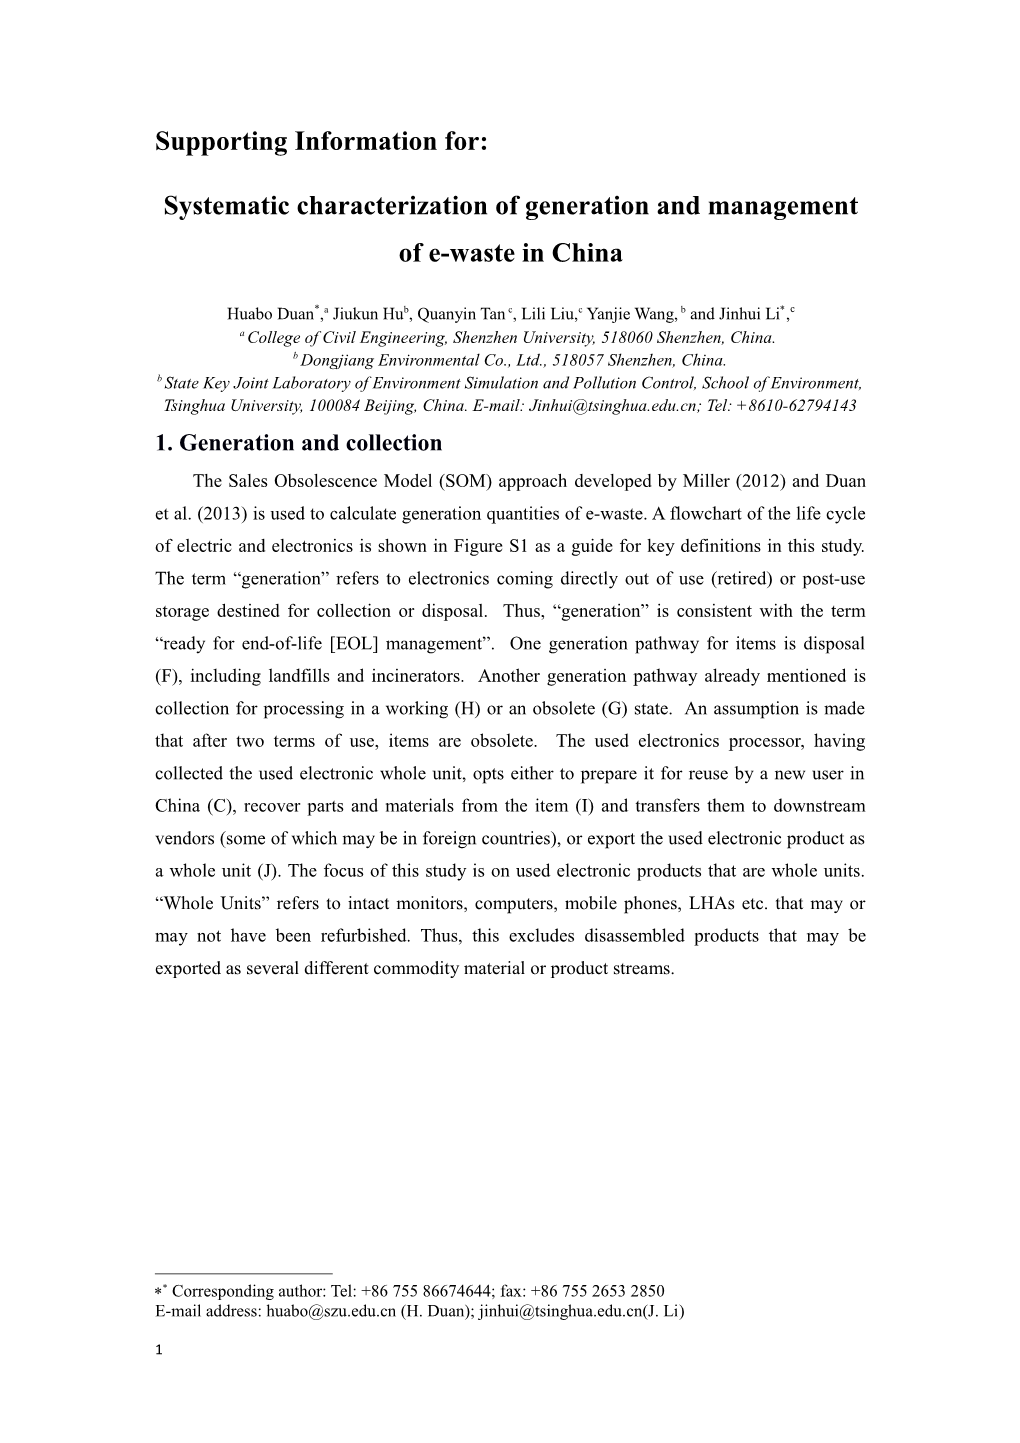 Systematic Characterization of Generation and Management of E-Waste in China